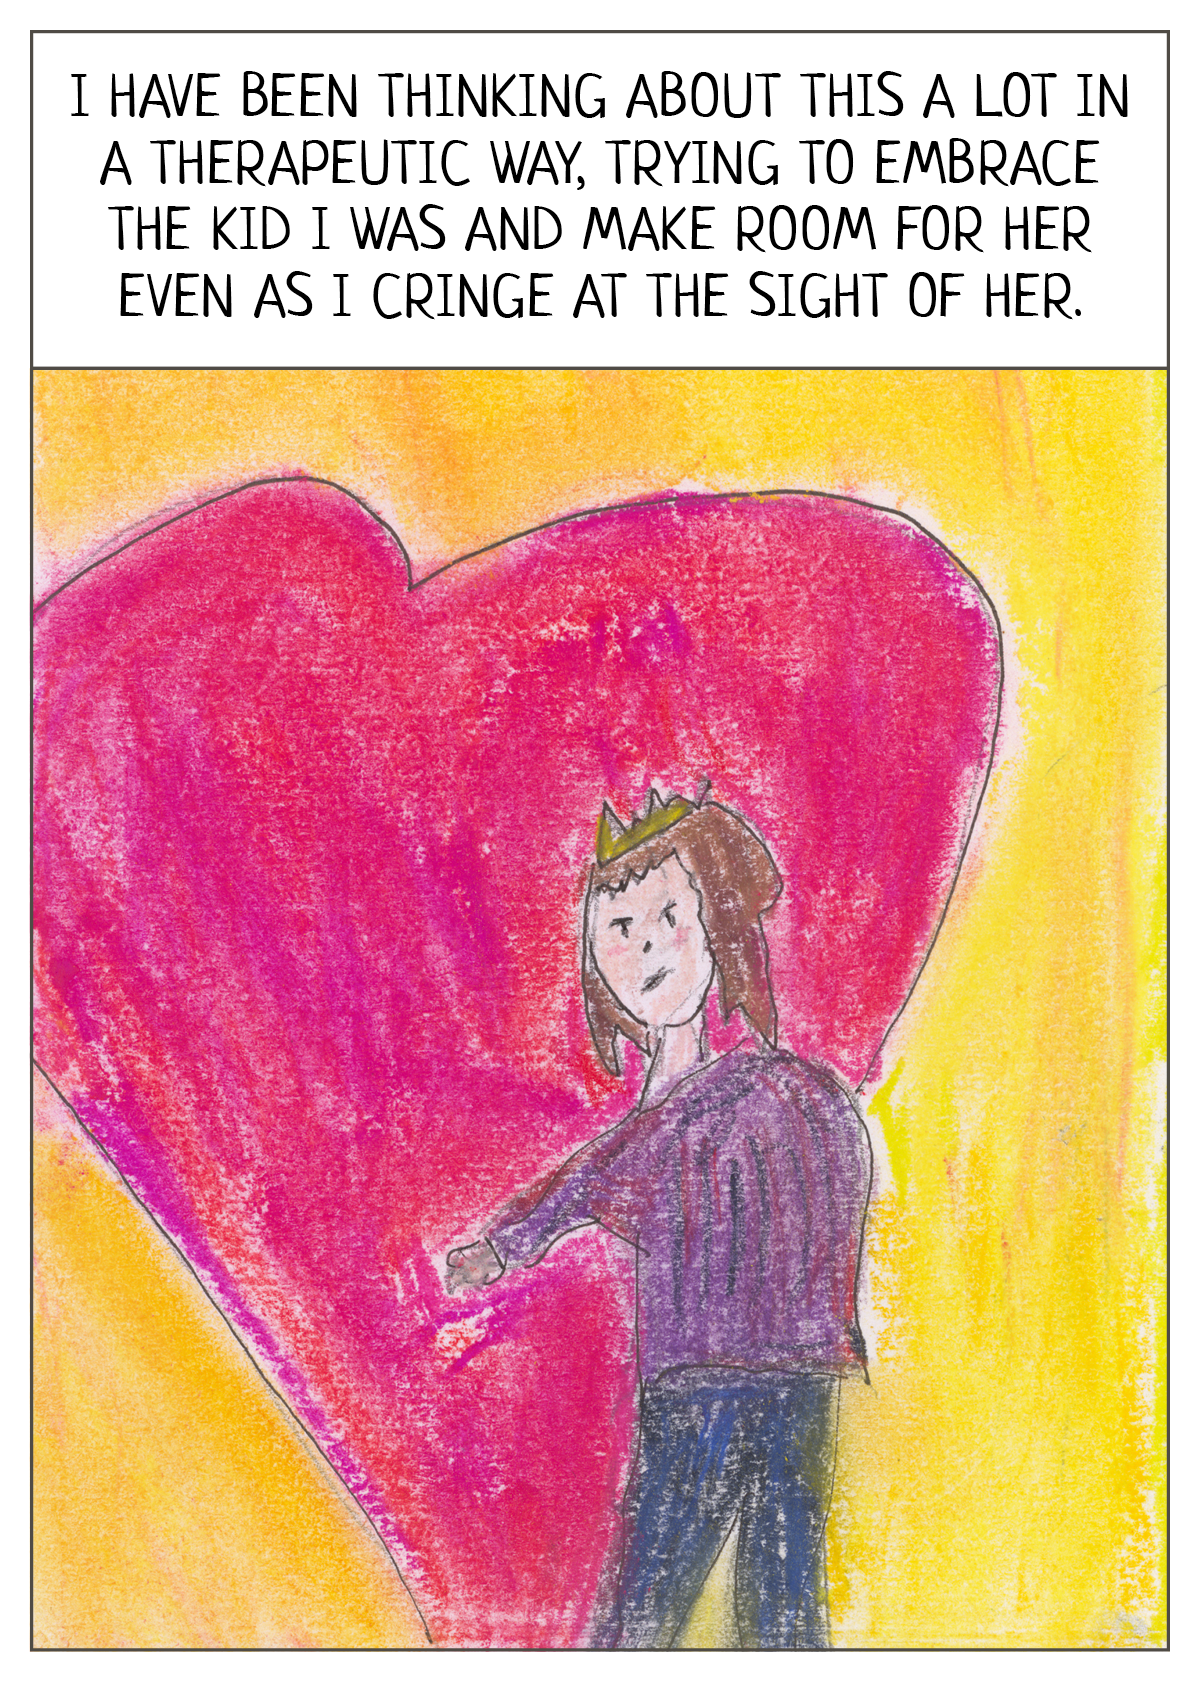 Reads: I have been thinking about this a lot in a therapeutic way, trying to embrace the kid I was and make room for her even as I cringe at the sight of her.   Image shows a girl in a duchess crown in an embrace with a fuschia heart. 